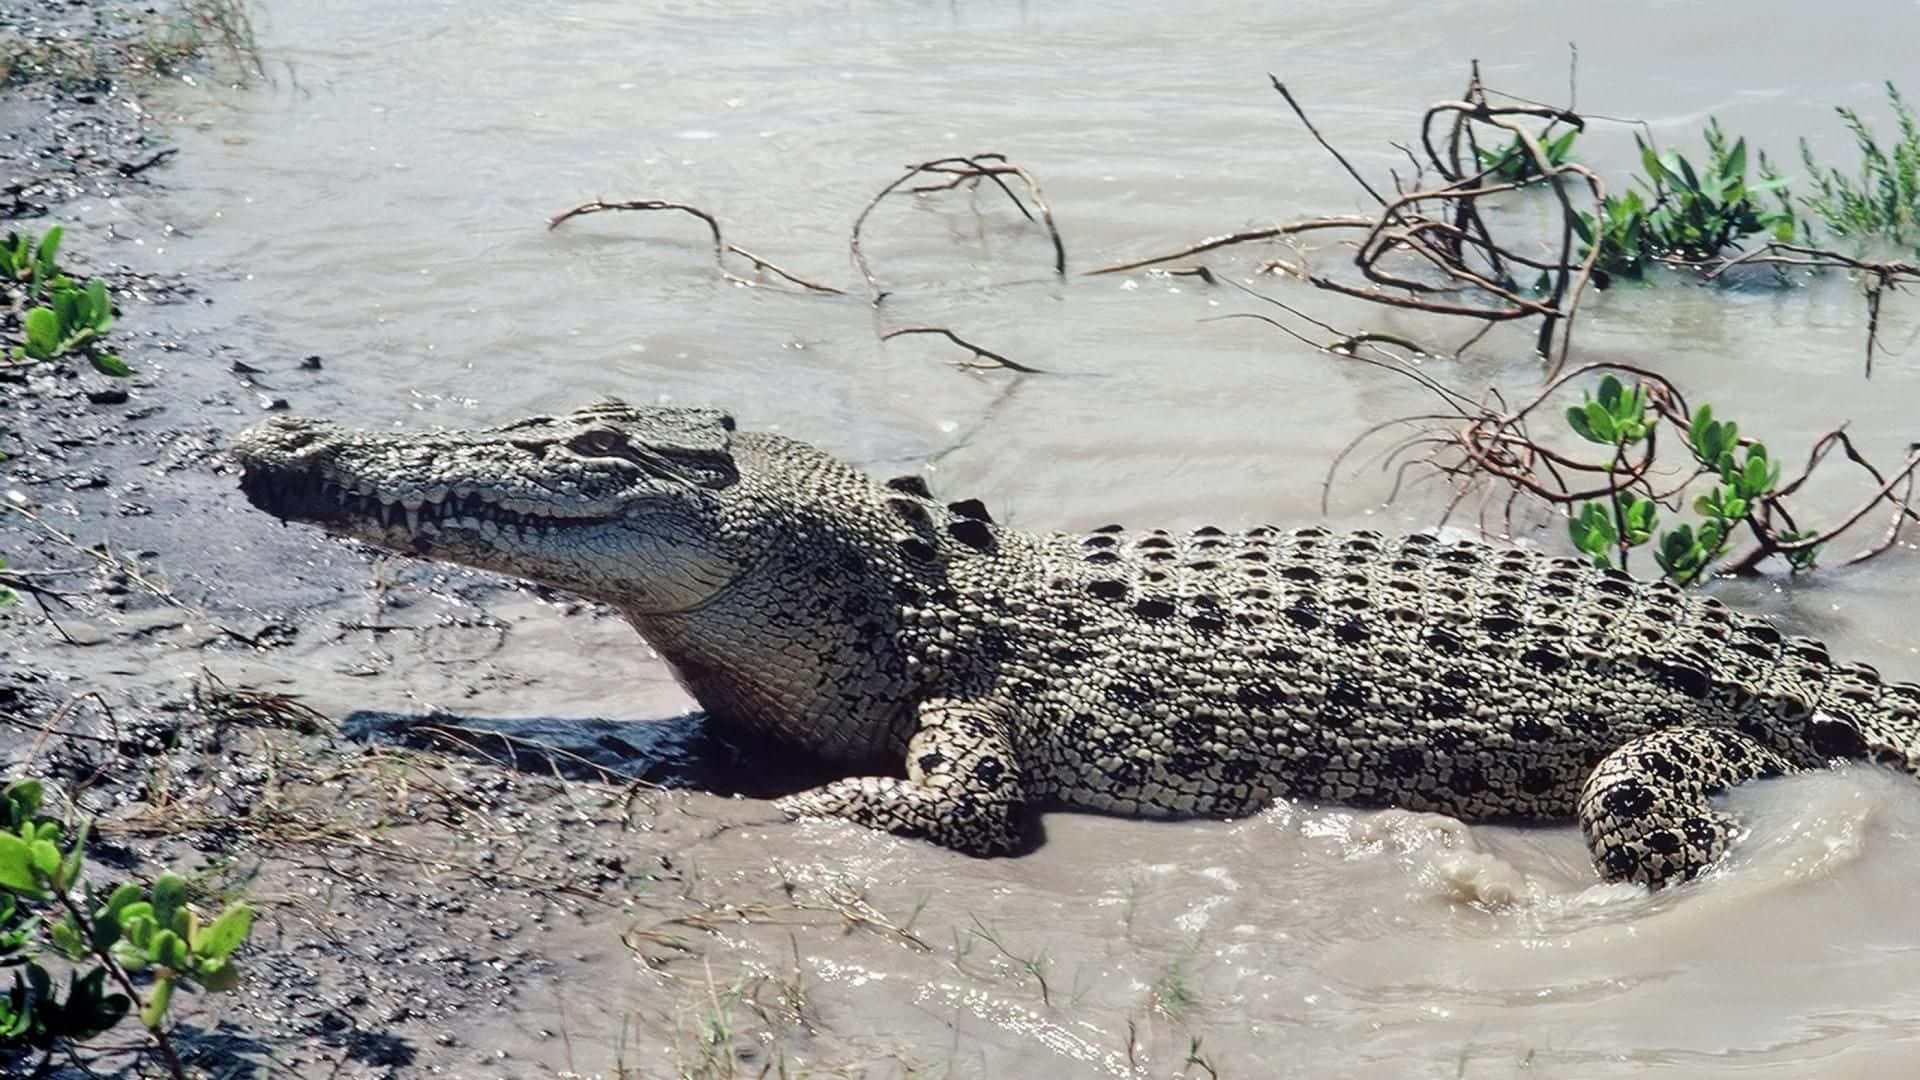 An alligator lounging in the sun